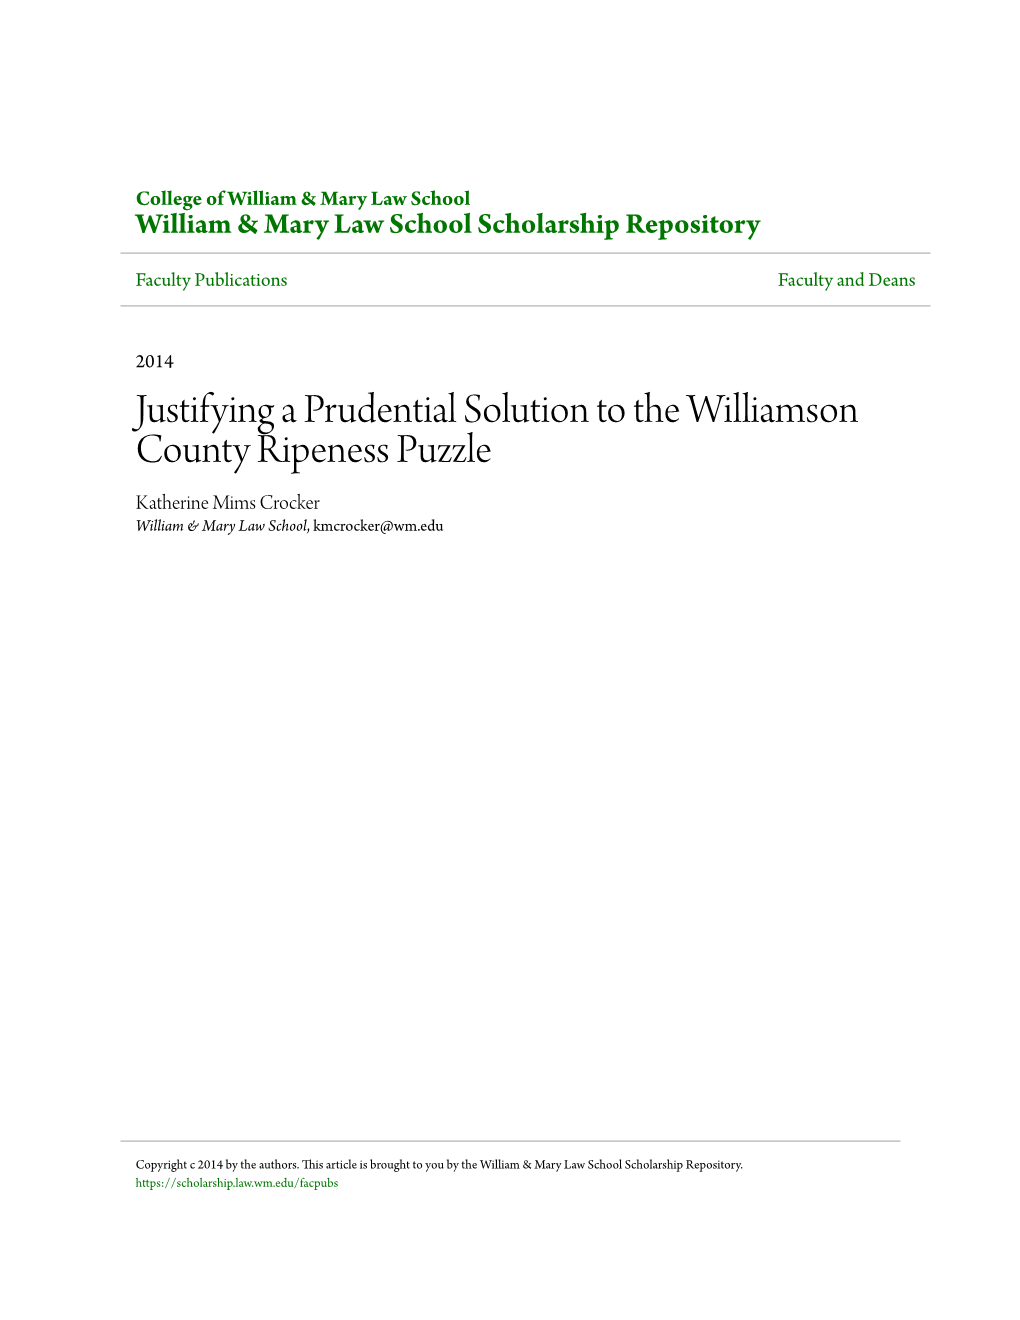 Justifying a Prudential Solution to the Williamson County Ripeness Puzzle Katherine Mims Crocker William & Mary Law School, Kmcrocker@Wm.Edu